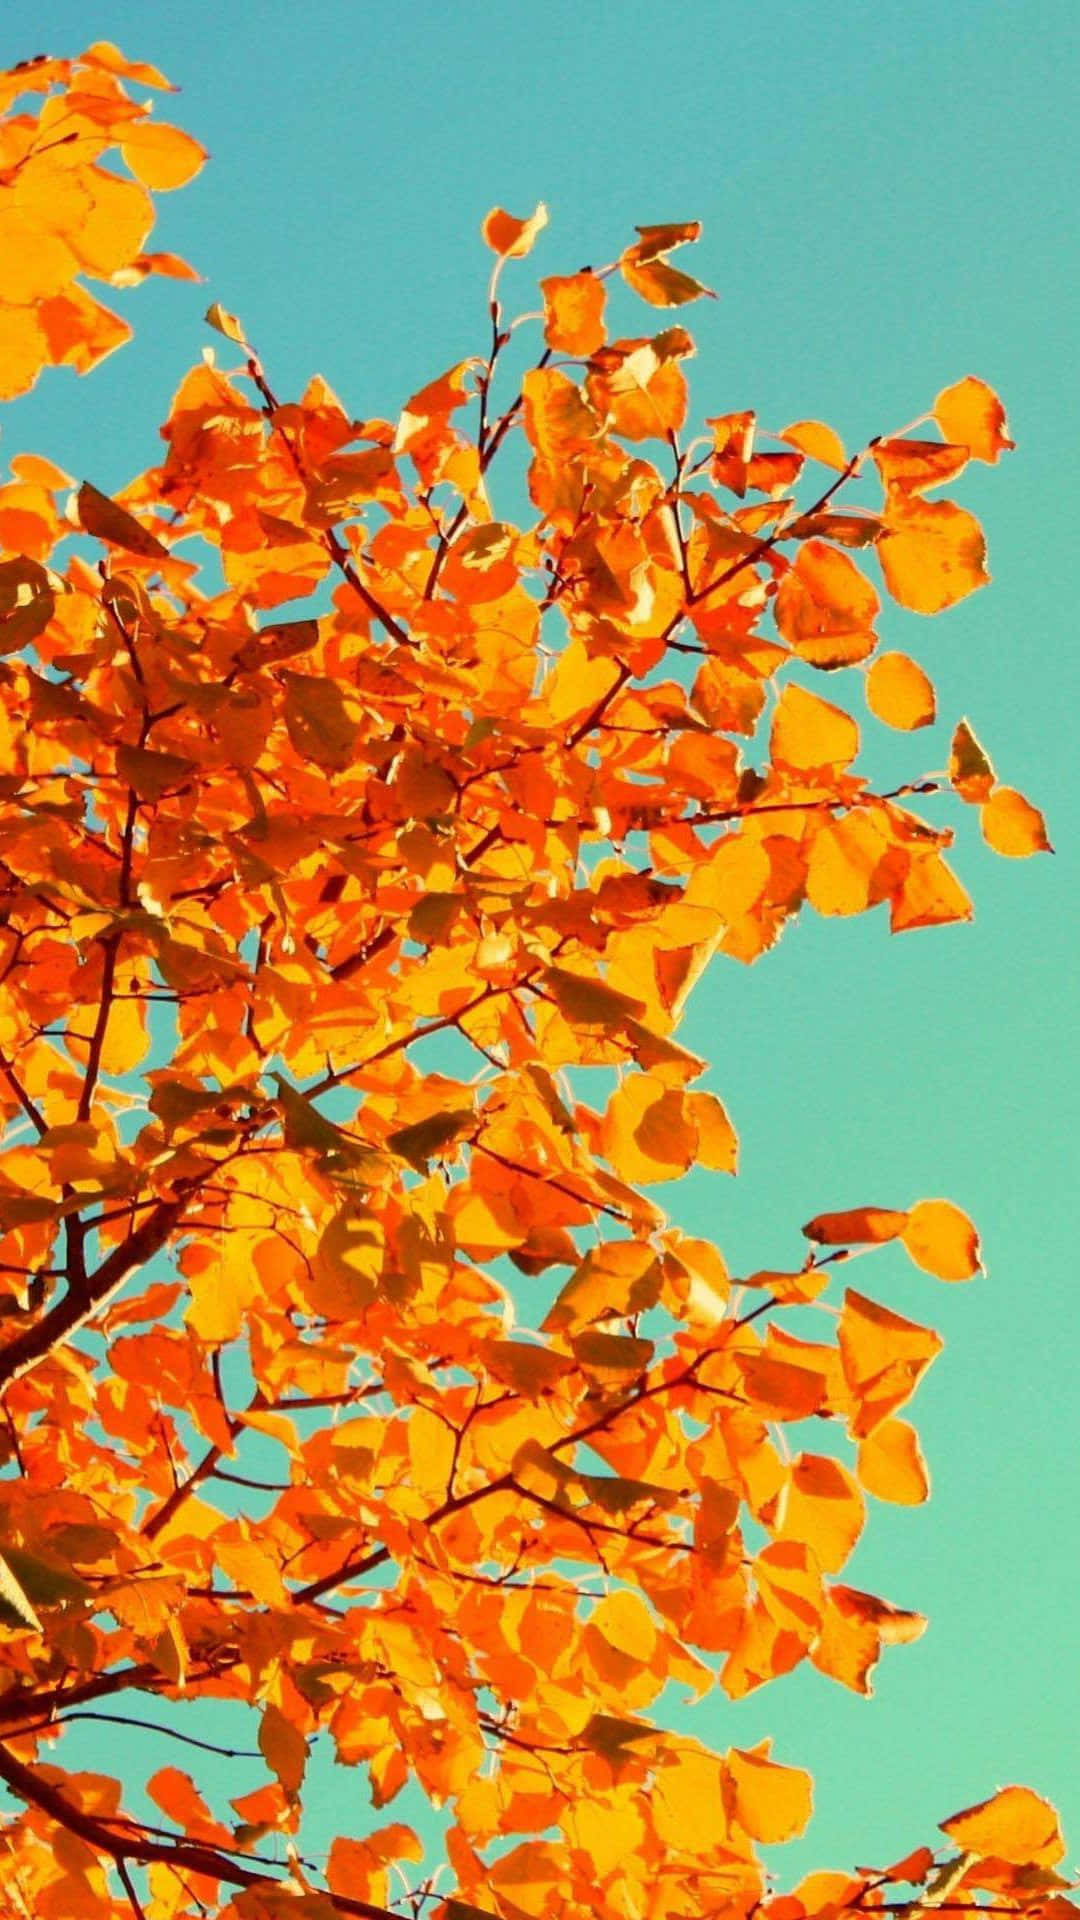 Autumn Leaves and your Phone Wallpaper